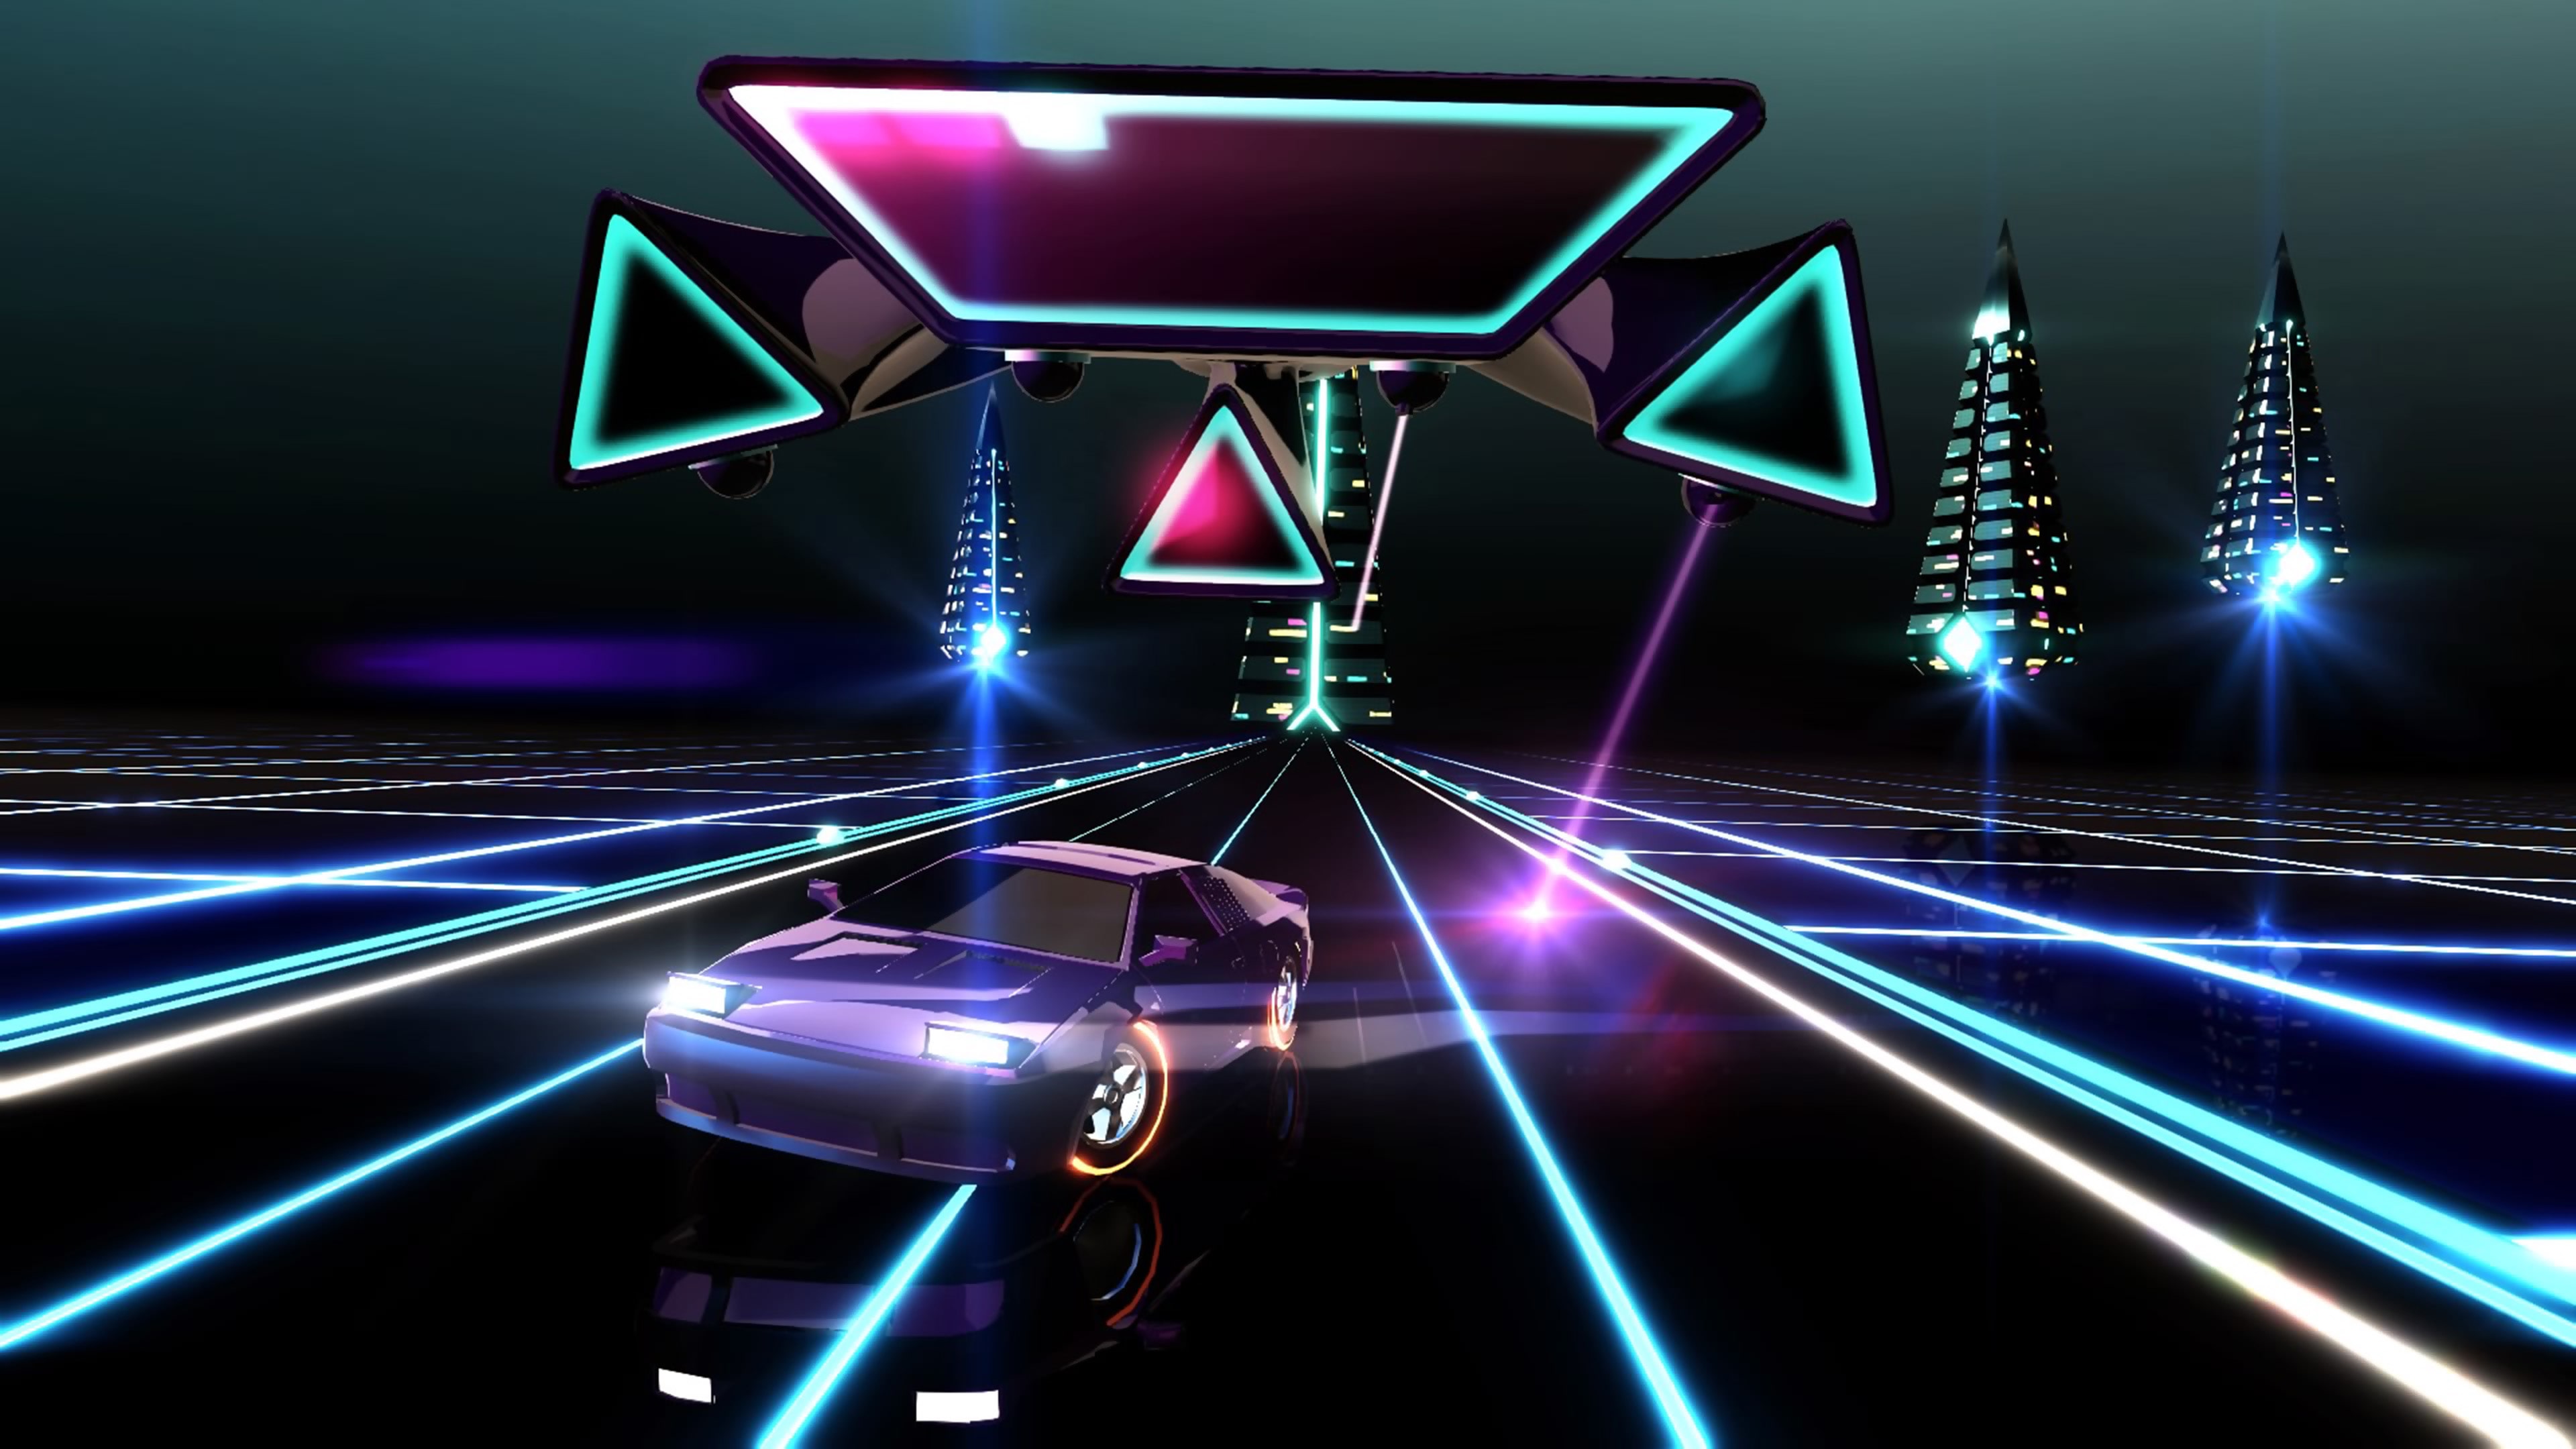 can neon drive be played with ps4 controller